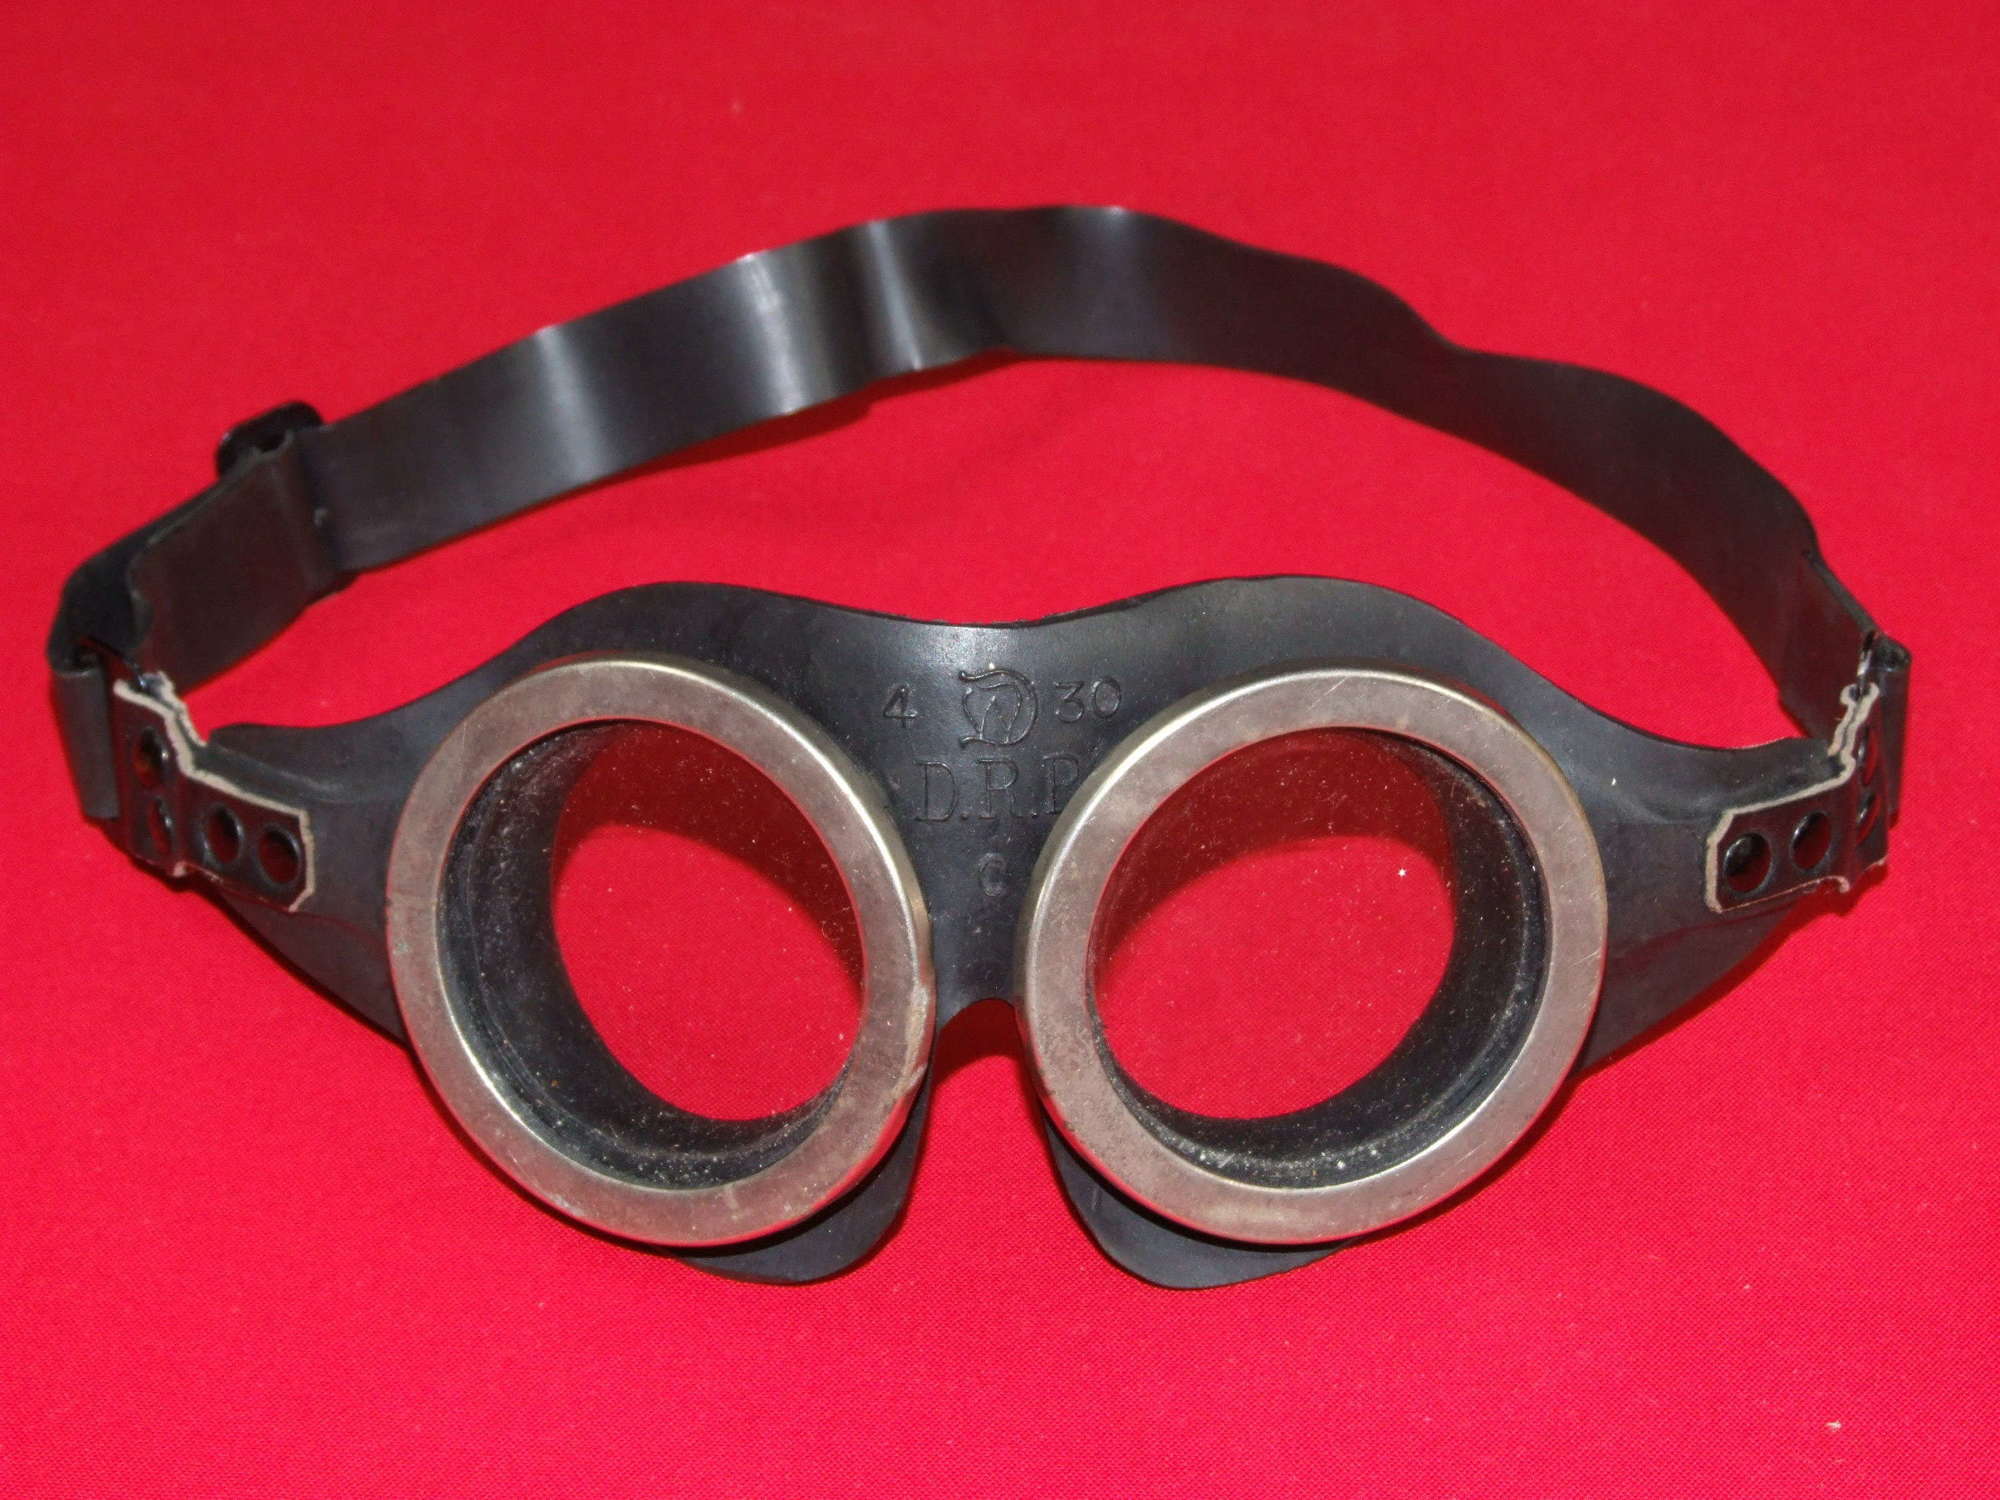 U Boat Goggles for use with the Tauchretter Escape Apparatus